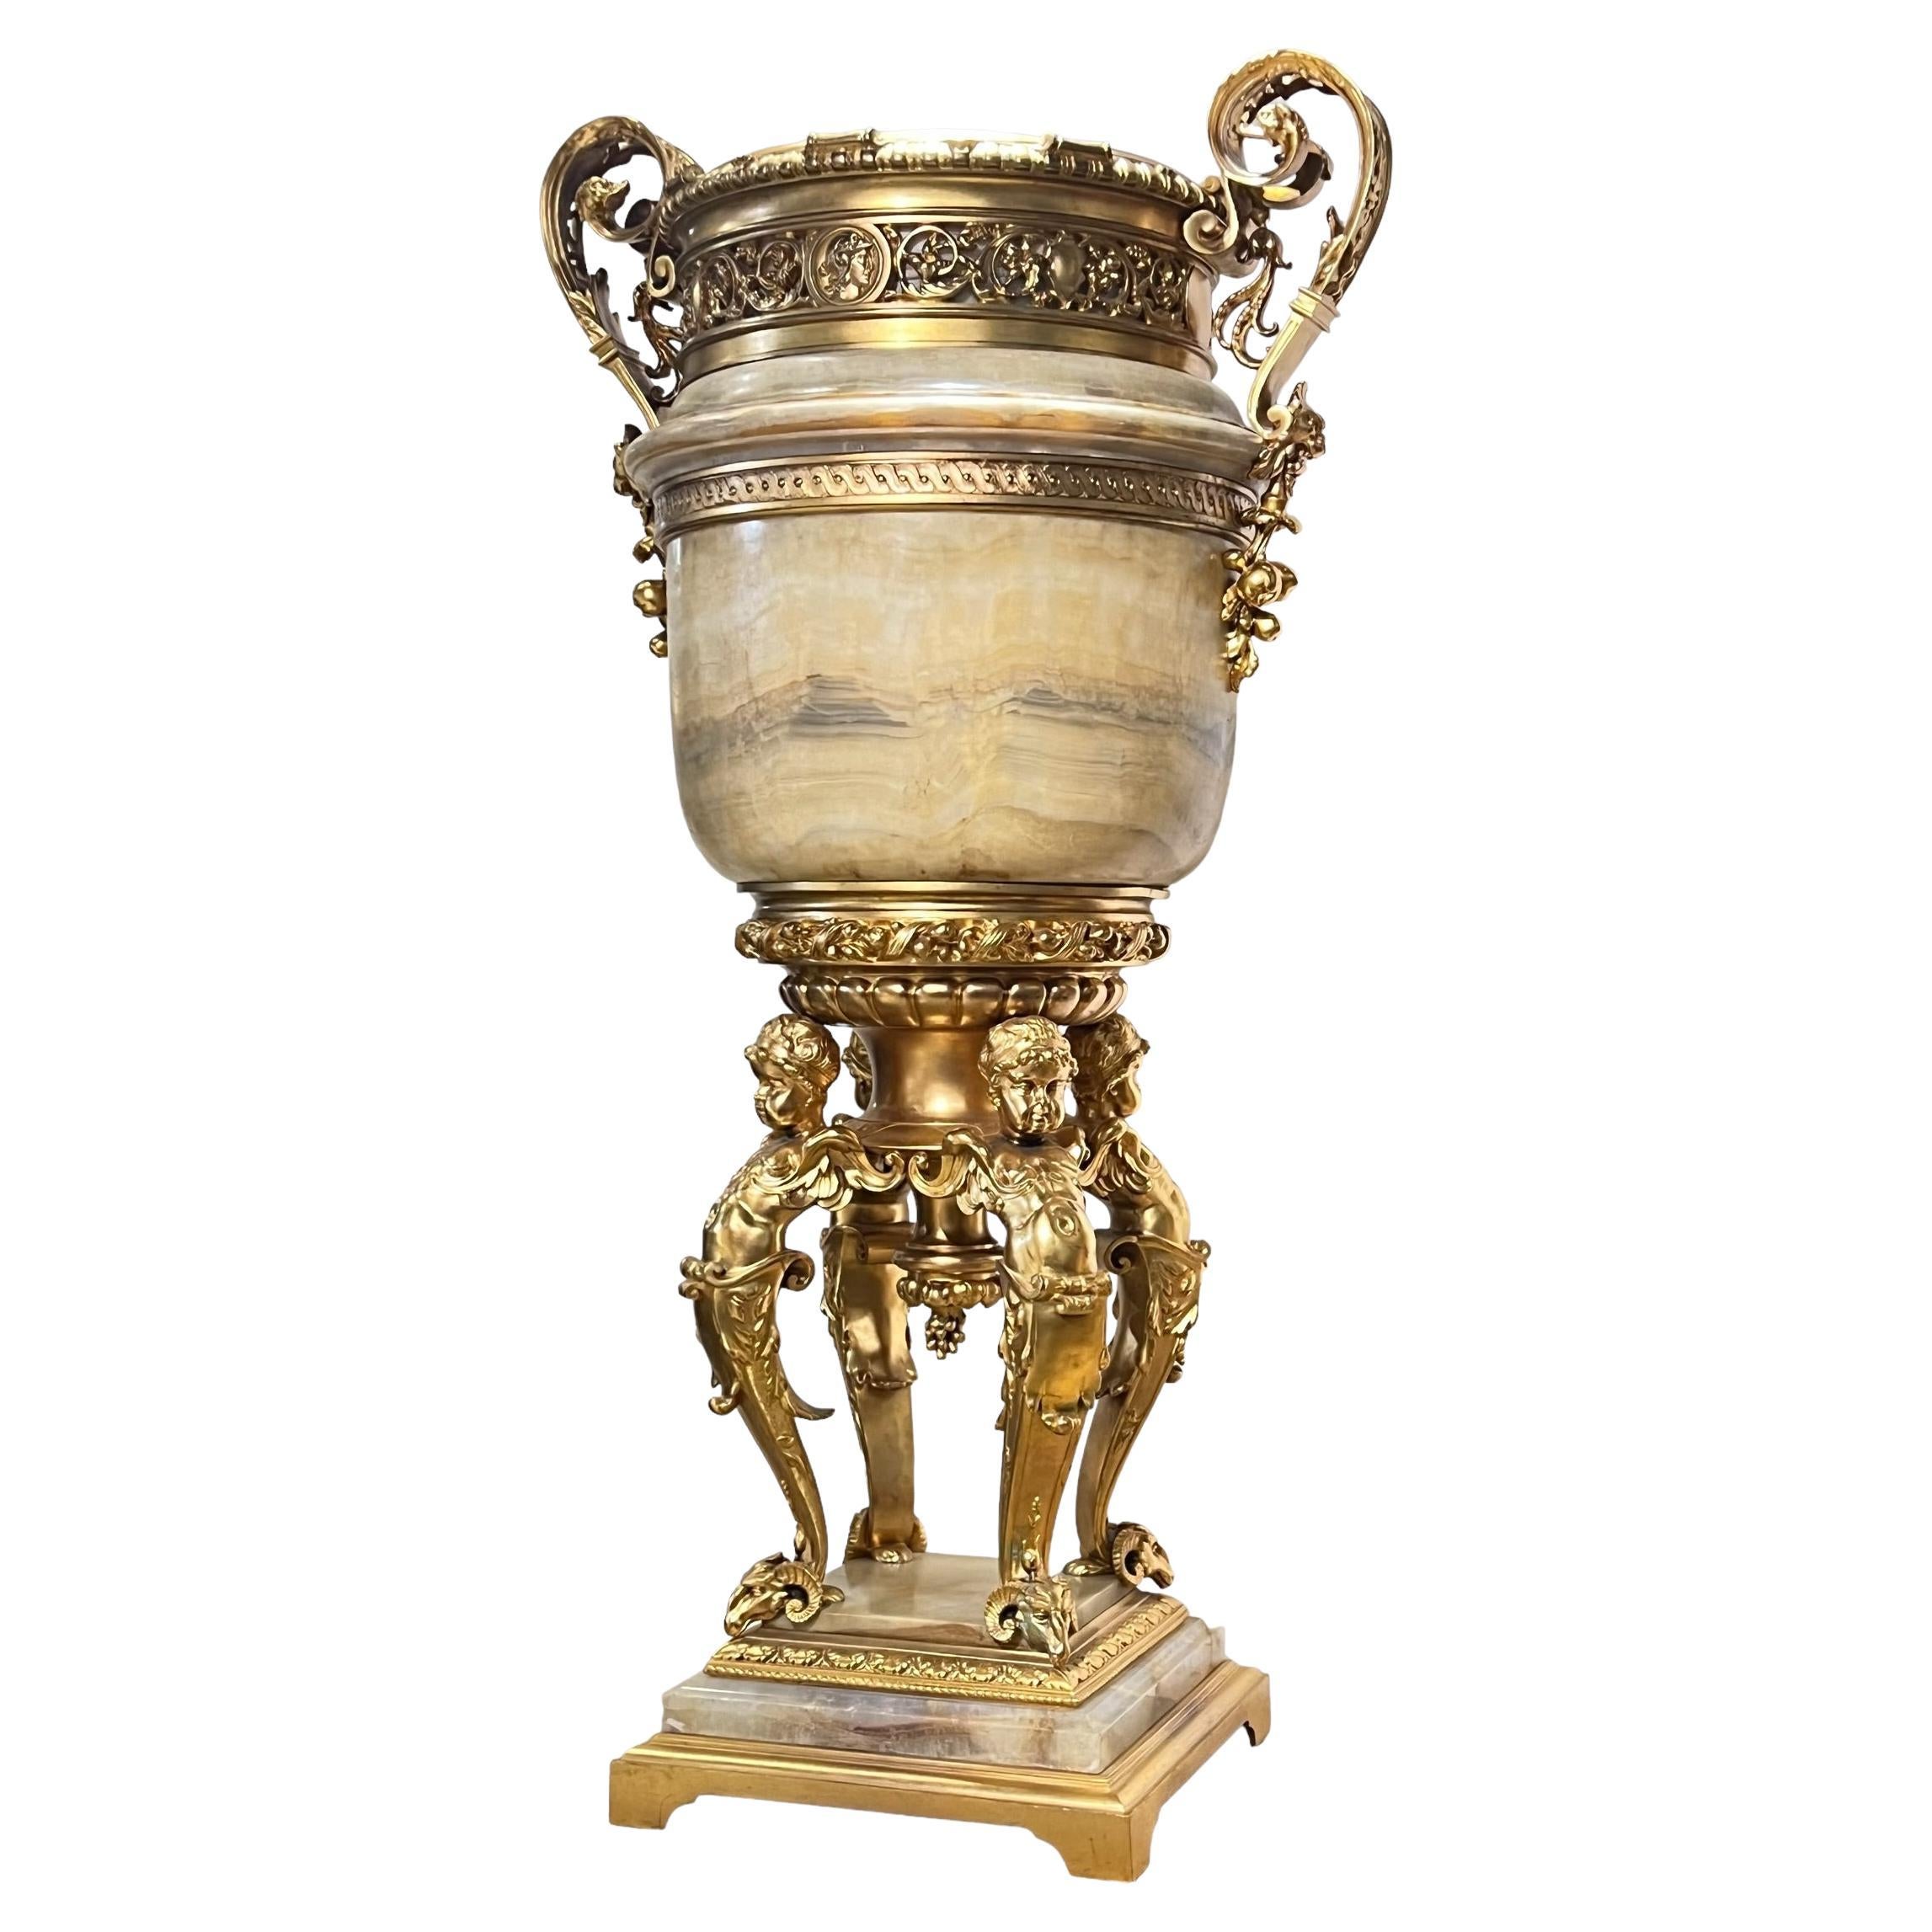 Monumental 19th Century French Neoclassical Onyx and Gilt Bronze Vase For Sale